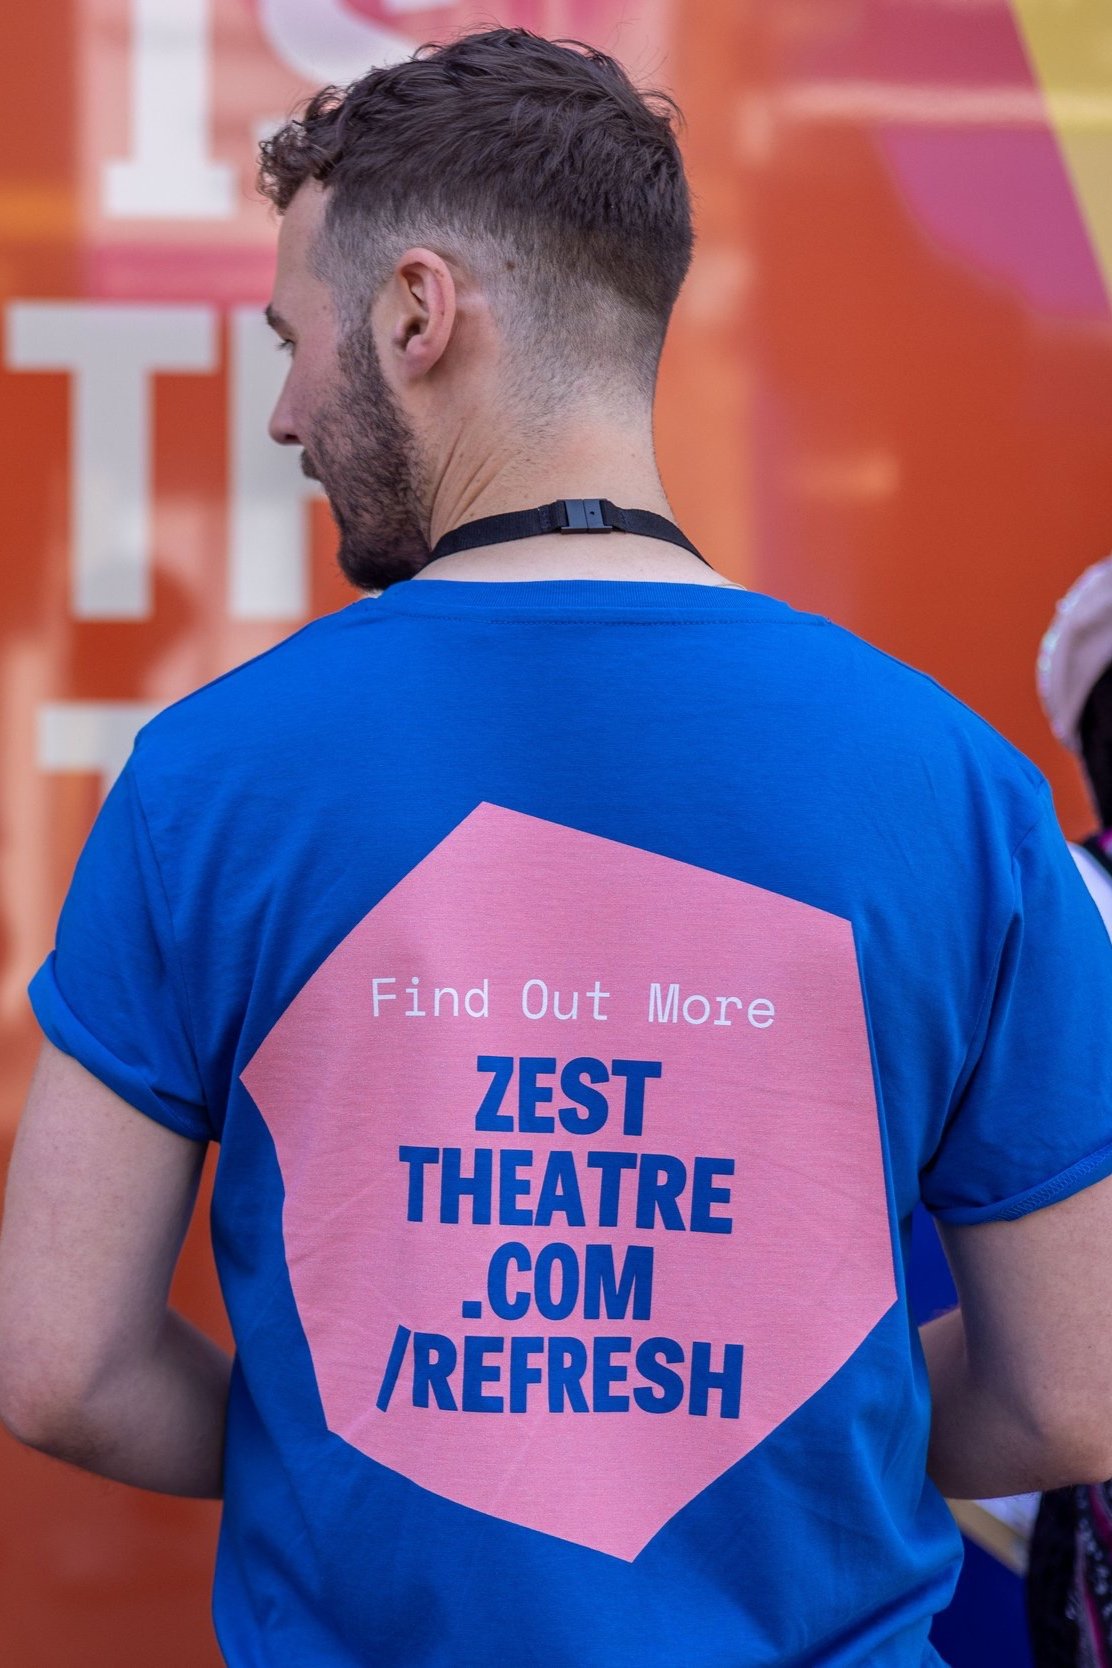 A zest member of staff wears a refresh t-shirt. The back reads ' Find Out More zesttheatre.com/refresh